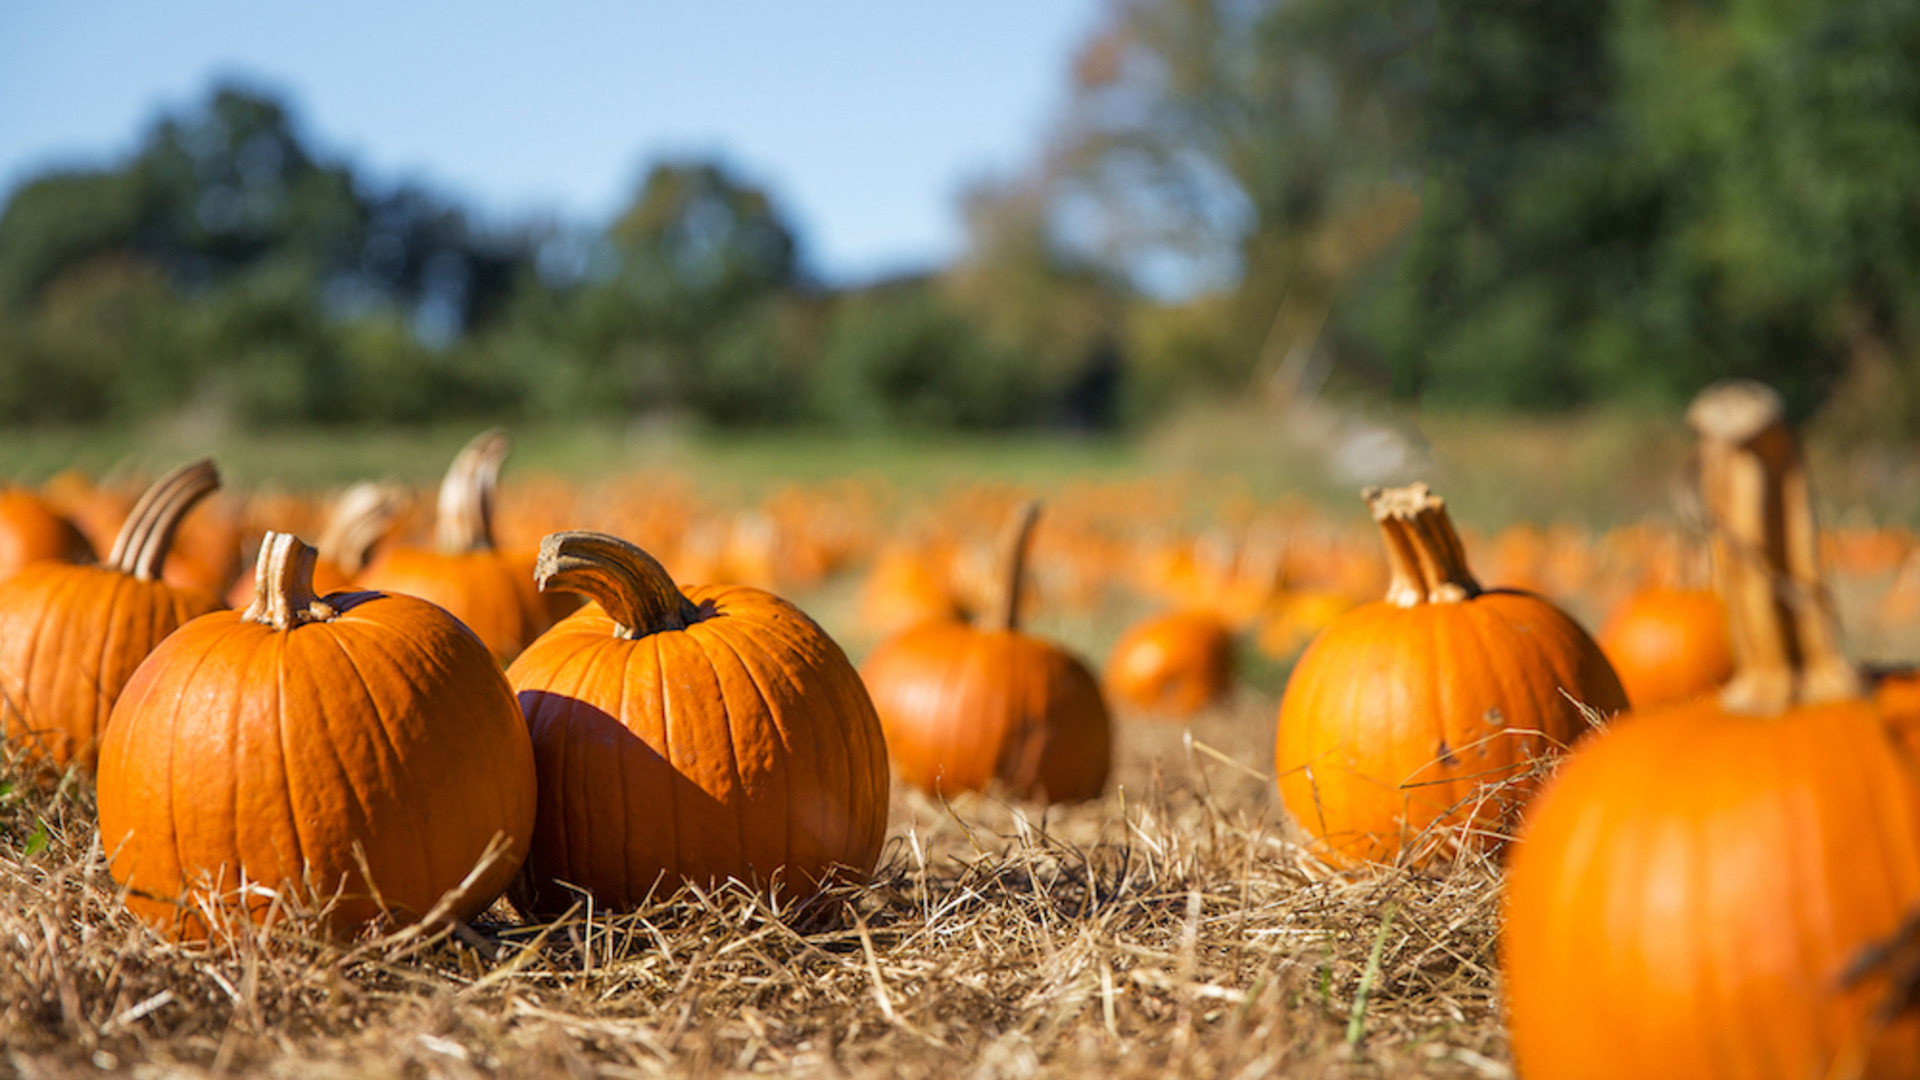 USDA Says Most U.S. Pumpkins Are Produced in 10 States